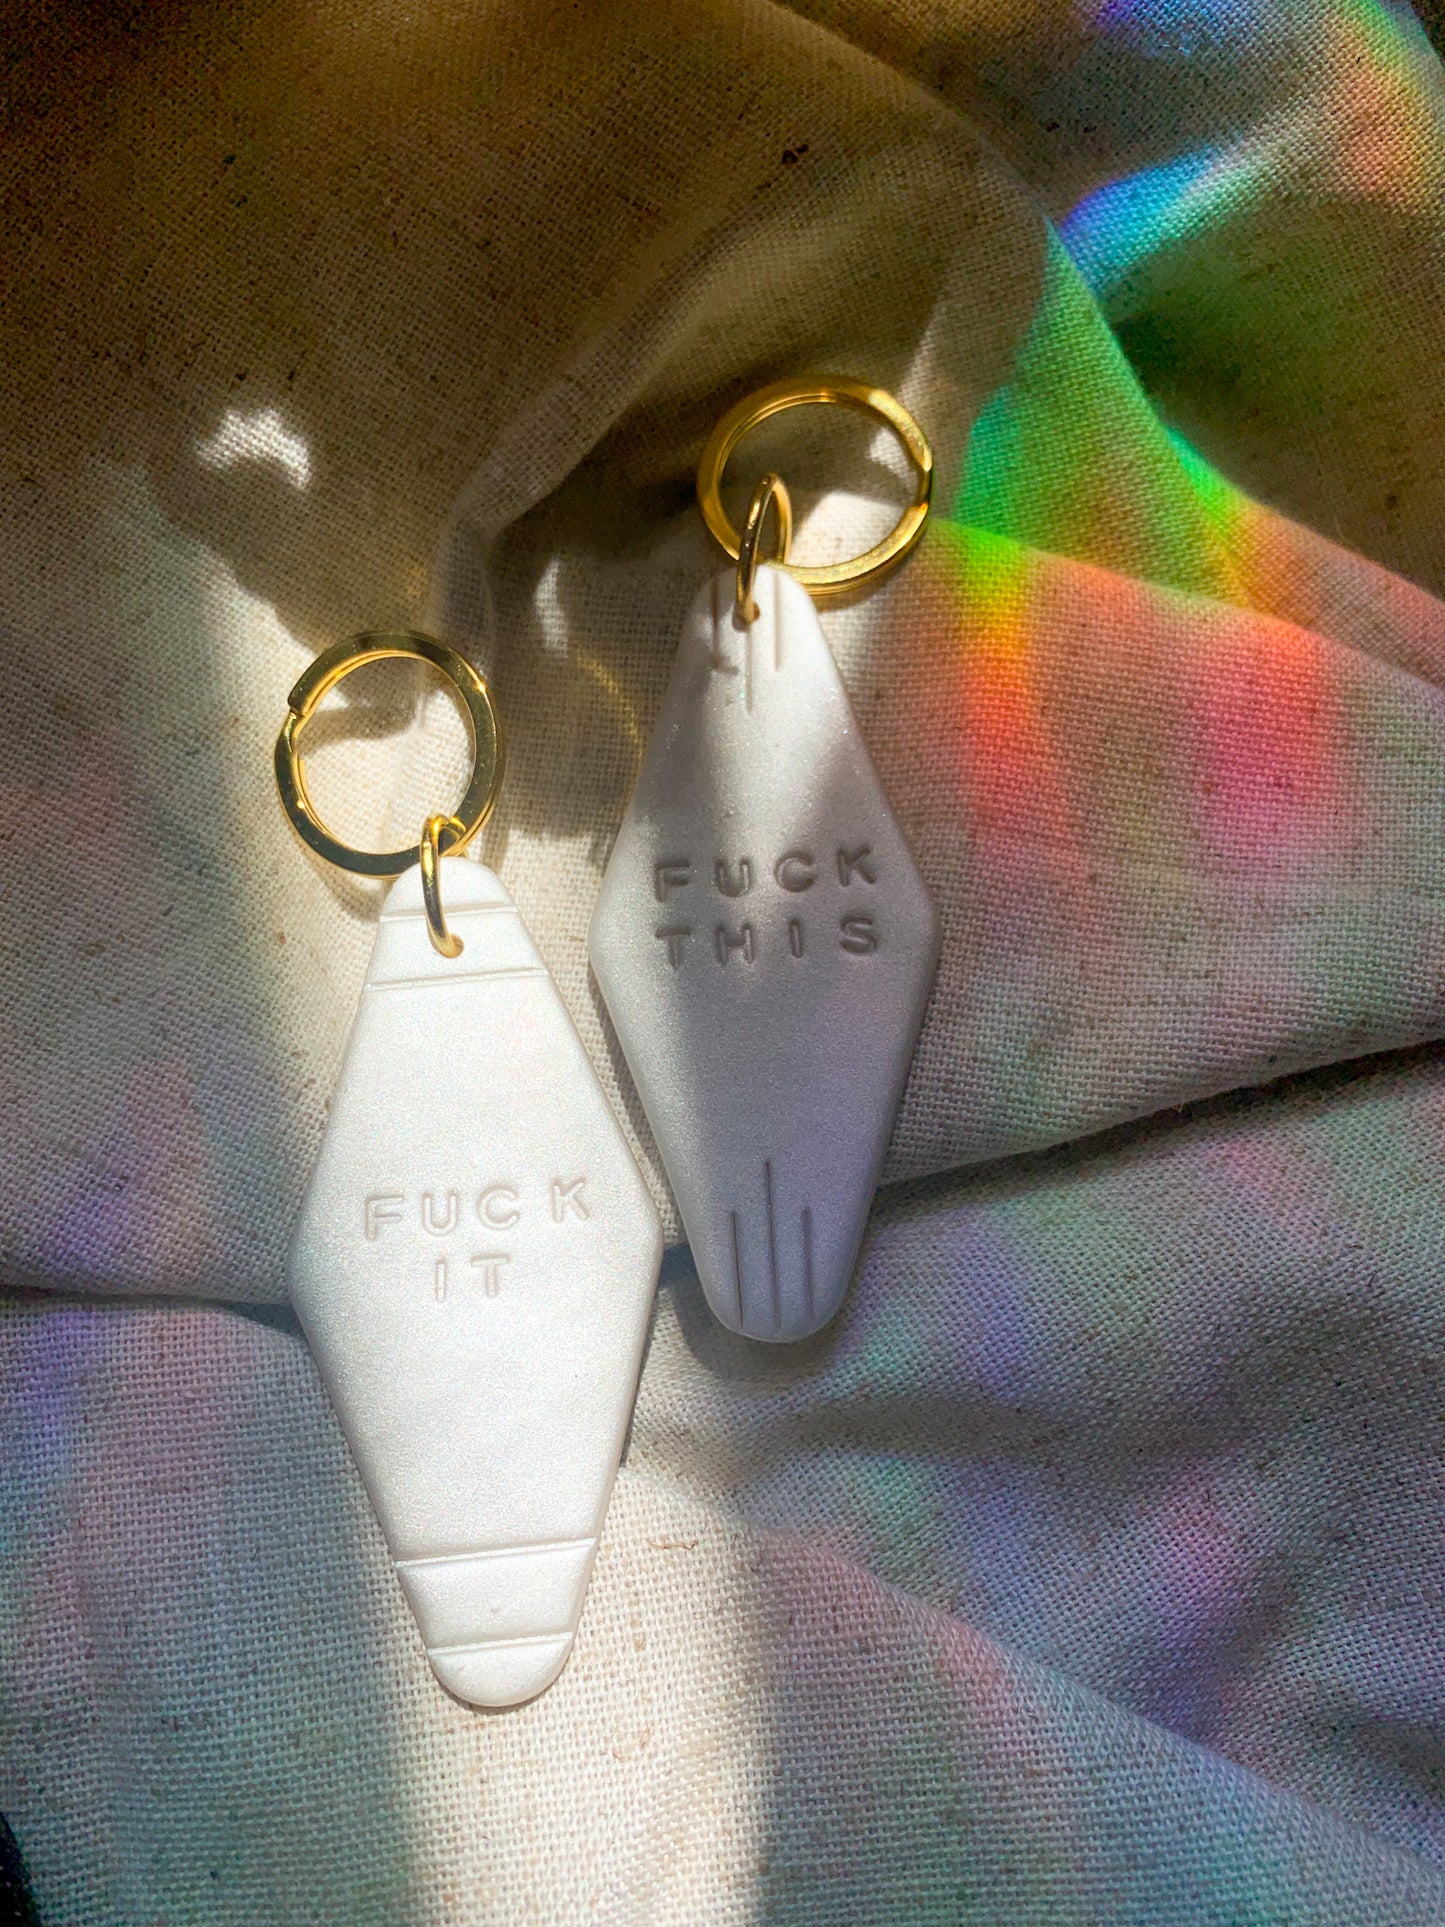 Pearly White Keychains